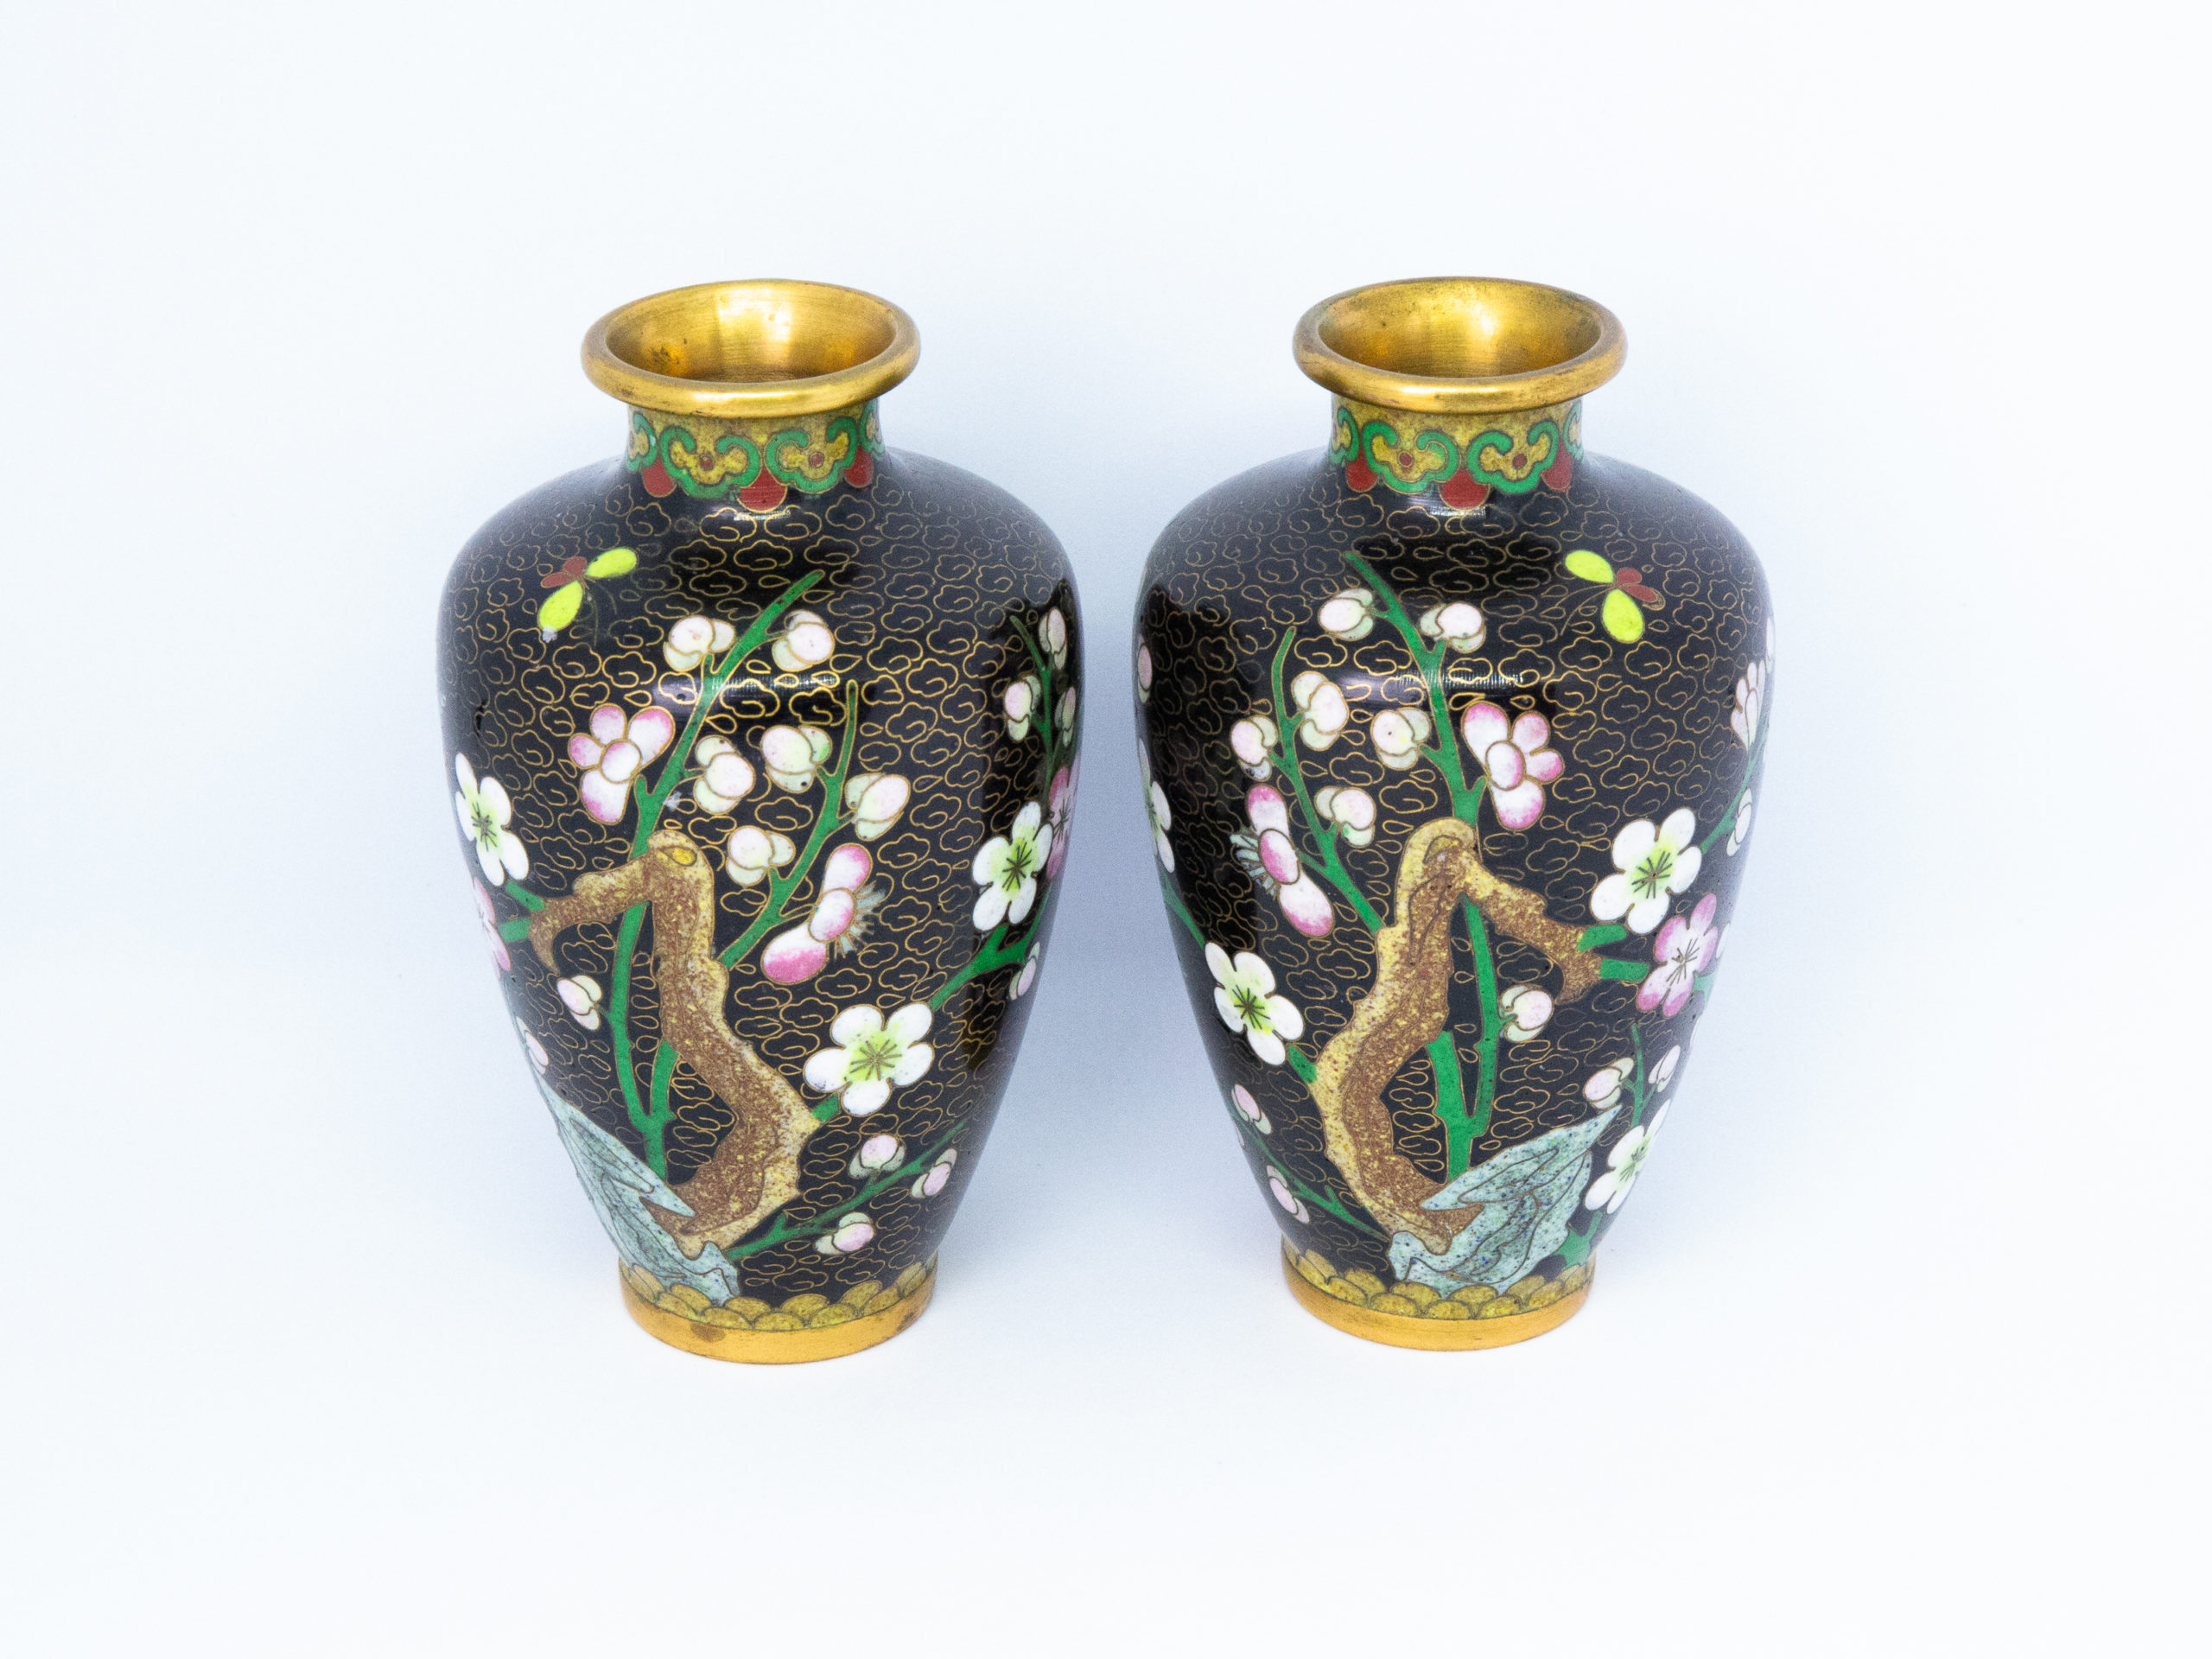 Pair of small mirror image cloisonné vases. Pretty and striking pair of cloisonné vases with mirror image of plum blossoms. The black background brings out the beautiful colour detail of the decoration. Measures 32mm in diameter at base and top and 60mm in diameter at widest area towards top of the vase. Main photo of the 2 vases displayed side by side and shown from the mirror image plum blossom side.